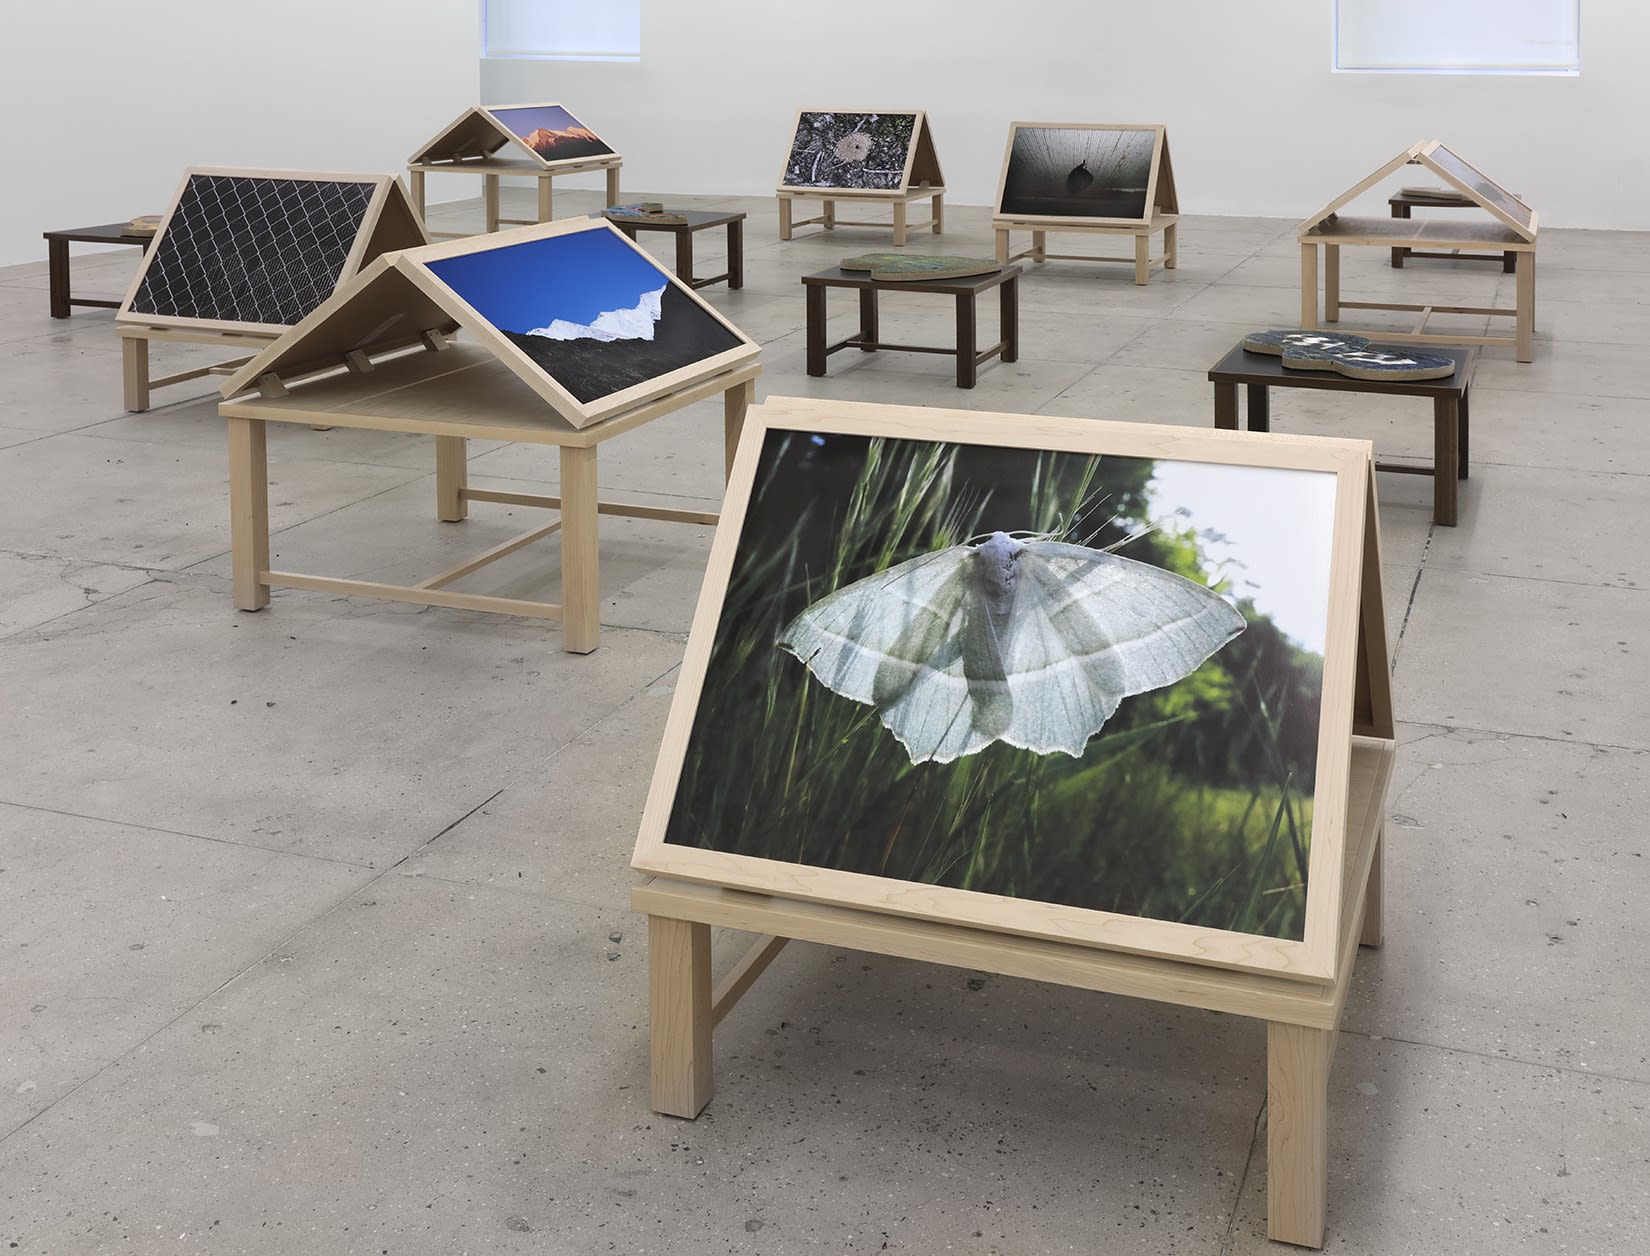 12 wooden platforms display color nature photographs and flat sculptures. In the foreground is a photograph of a white moth in grass. 